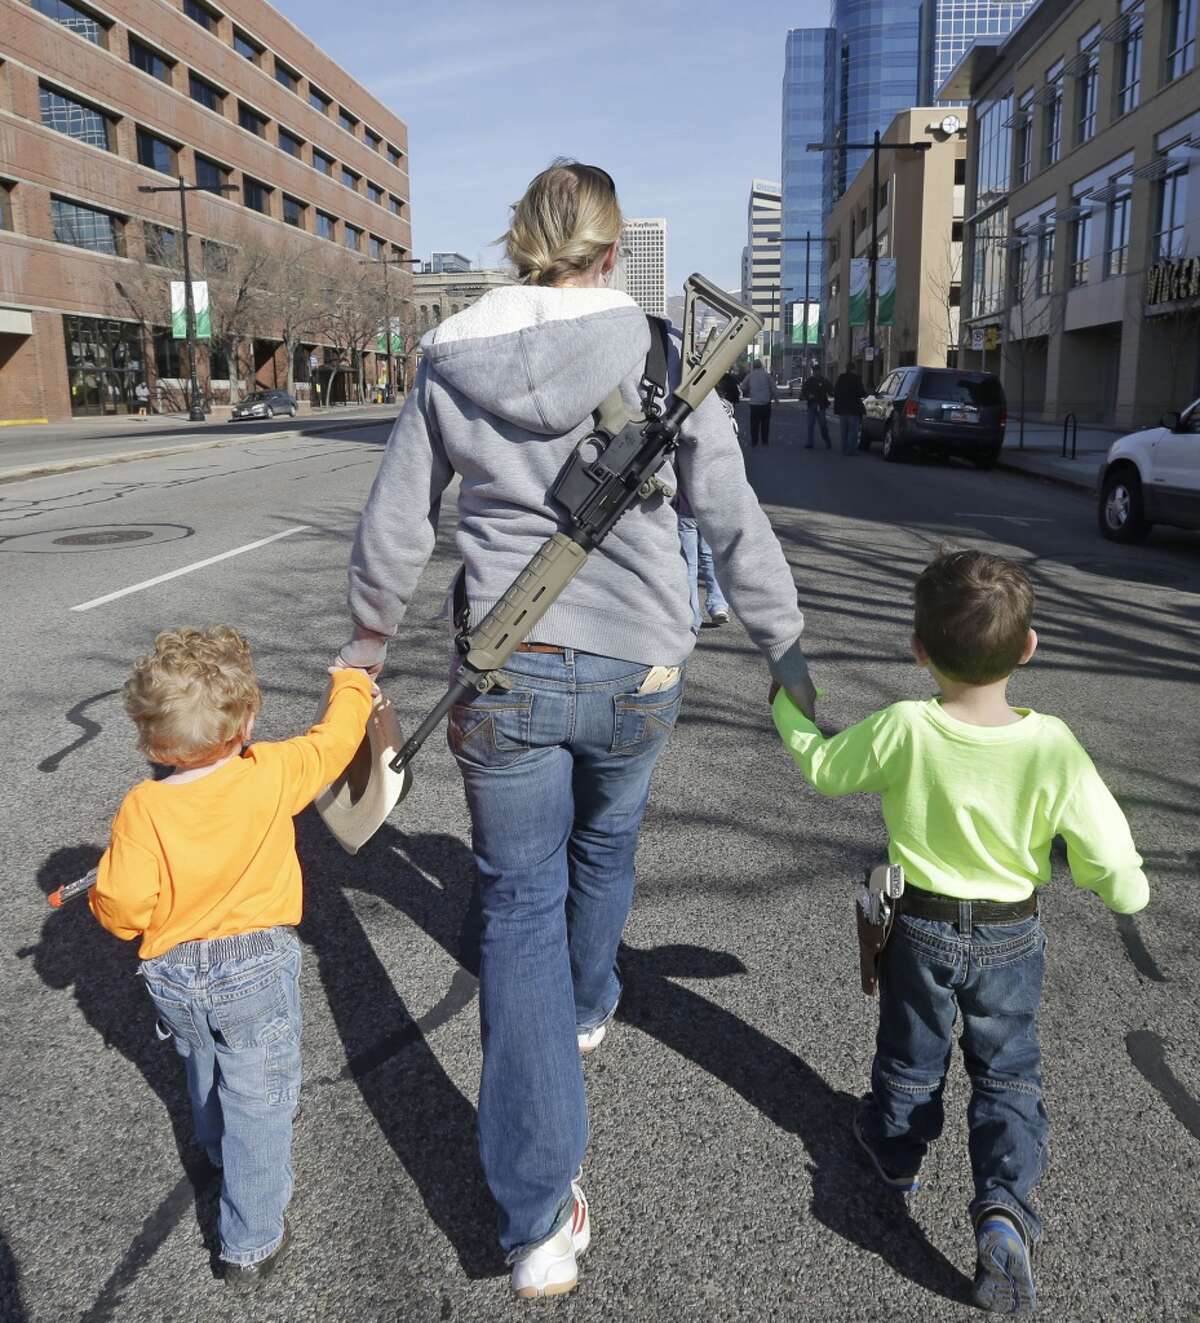 Gun rights activist Siri Davidson, center, has her AR15 slung on her back, as she walks with her children Keaton, 2, and Porter, 5, during a march for the 2nd Amendment rights Saturday, March 2, 2013, in Salt Lake City.